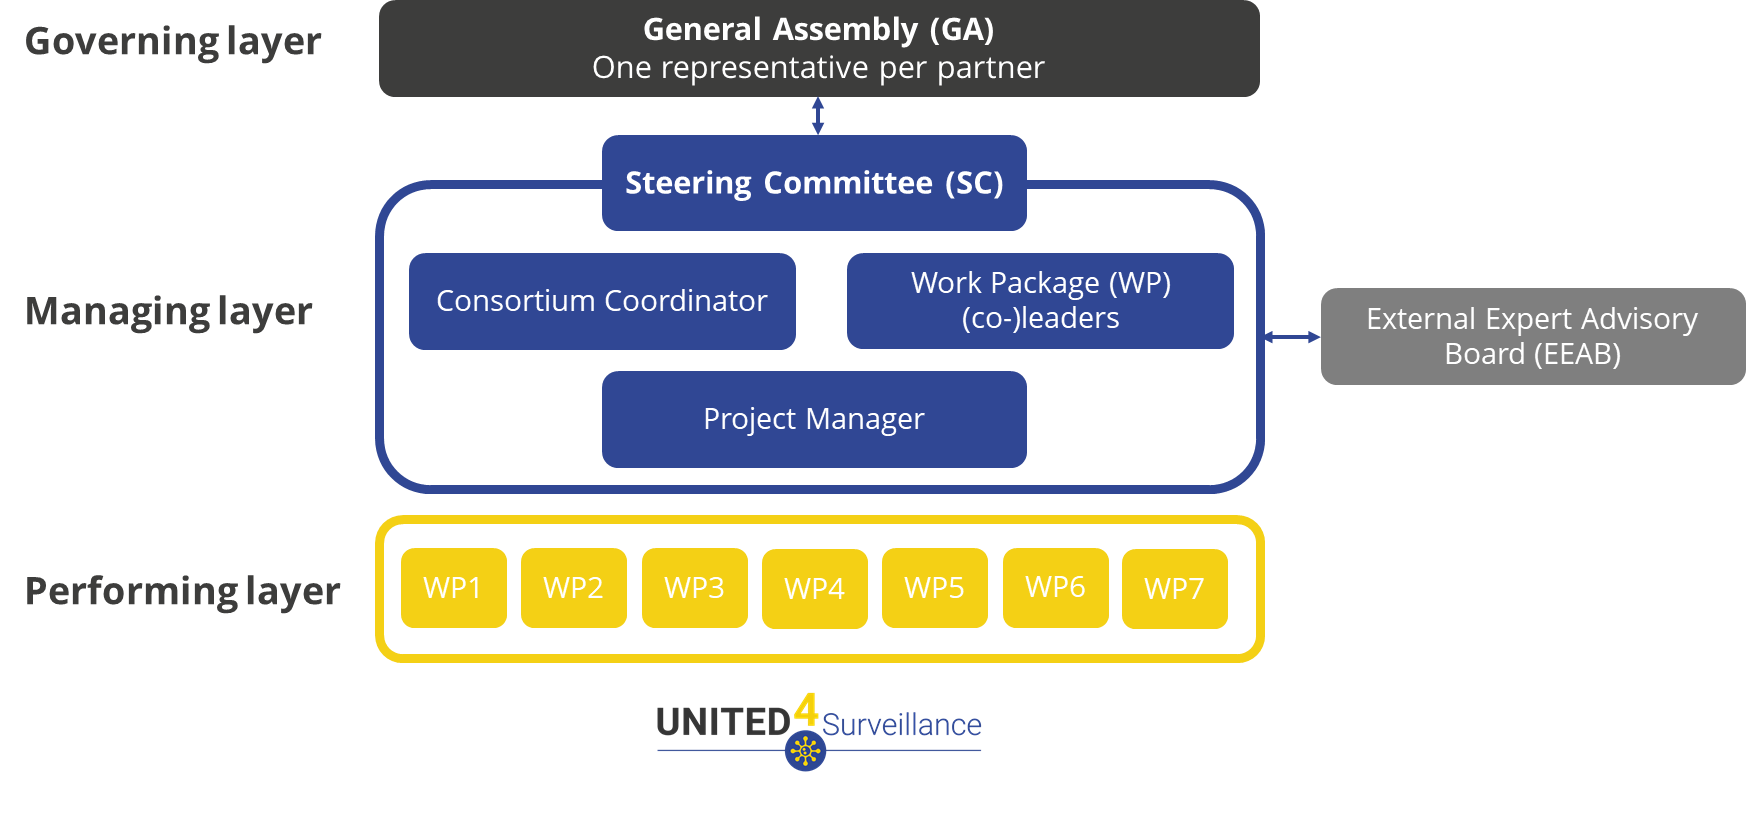 The governing layer is the general assembly (GA) represented by one representative per partner. The managing layer consists of the Steering Committee (SC) and External Expert Advisory Board (EEAB). The performing layers consists of all work packages.